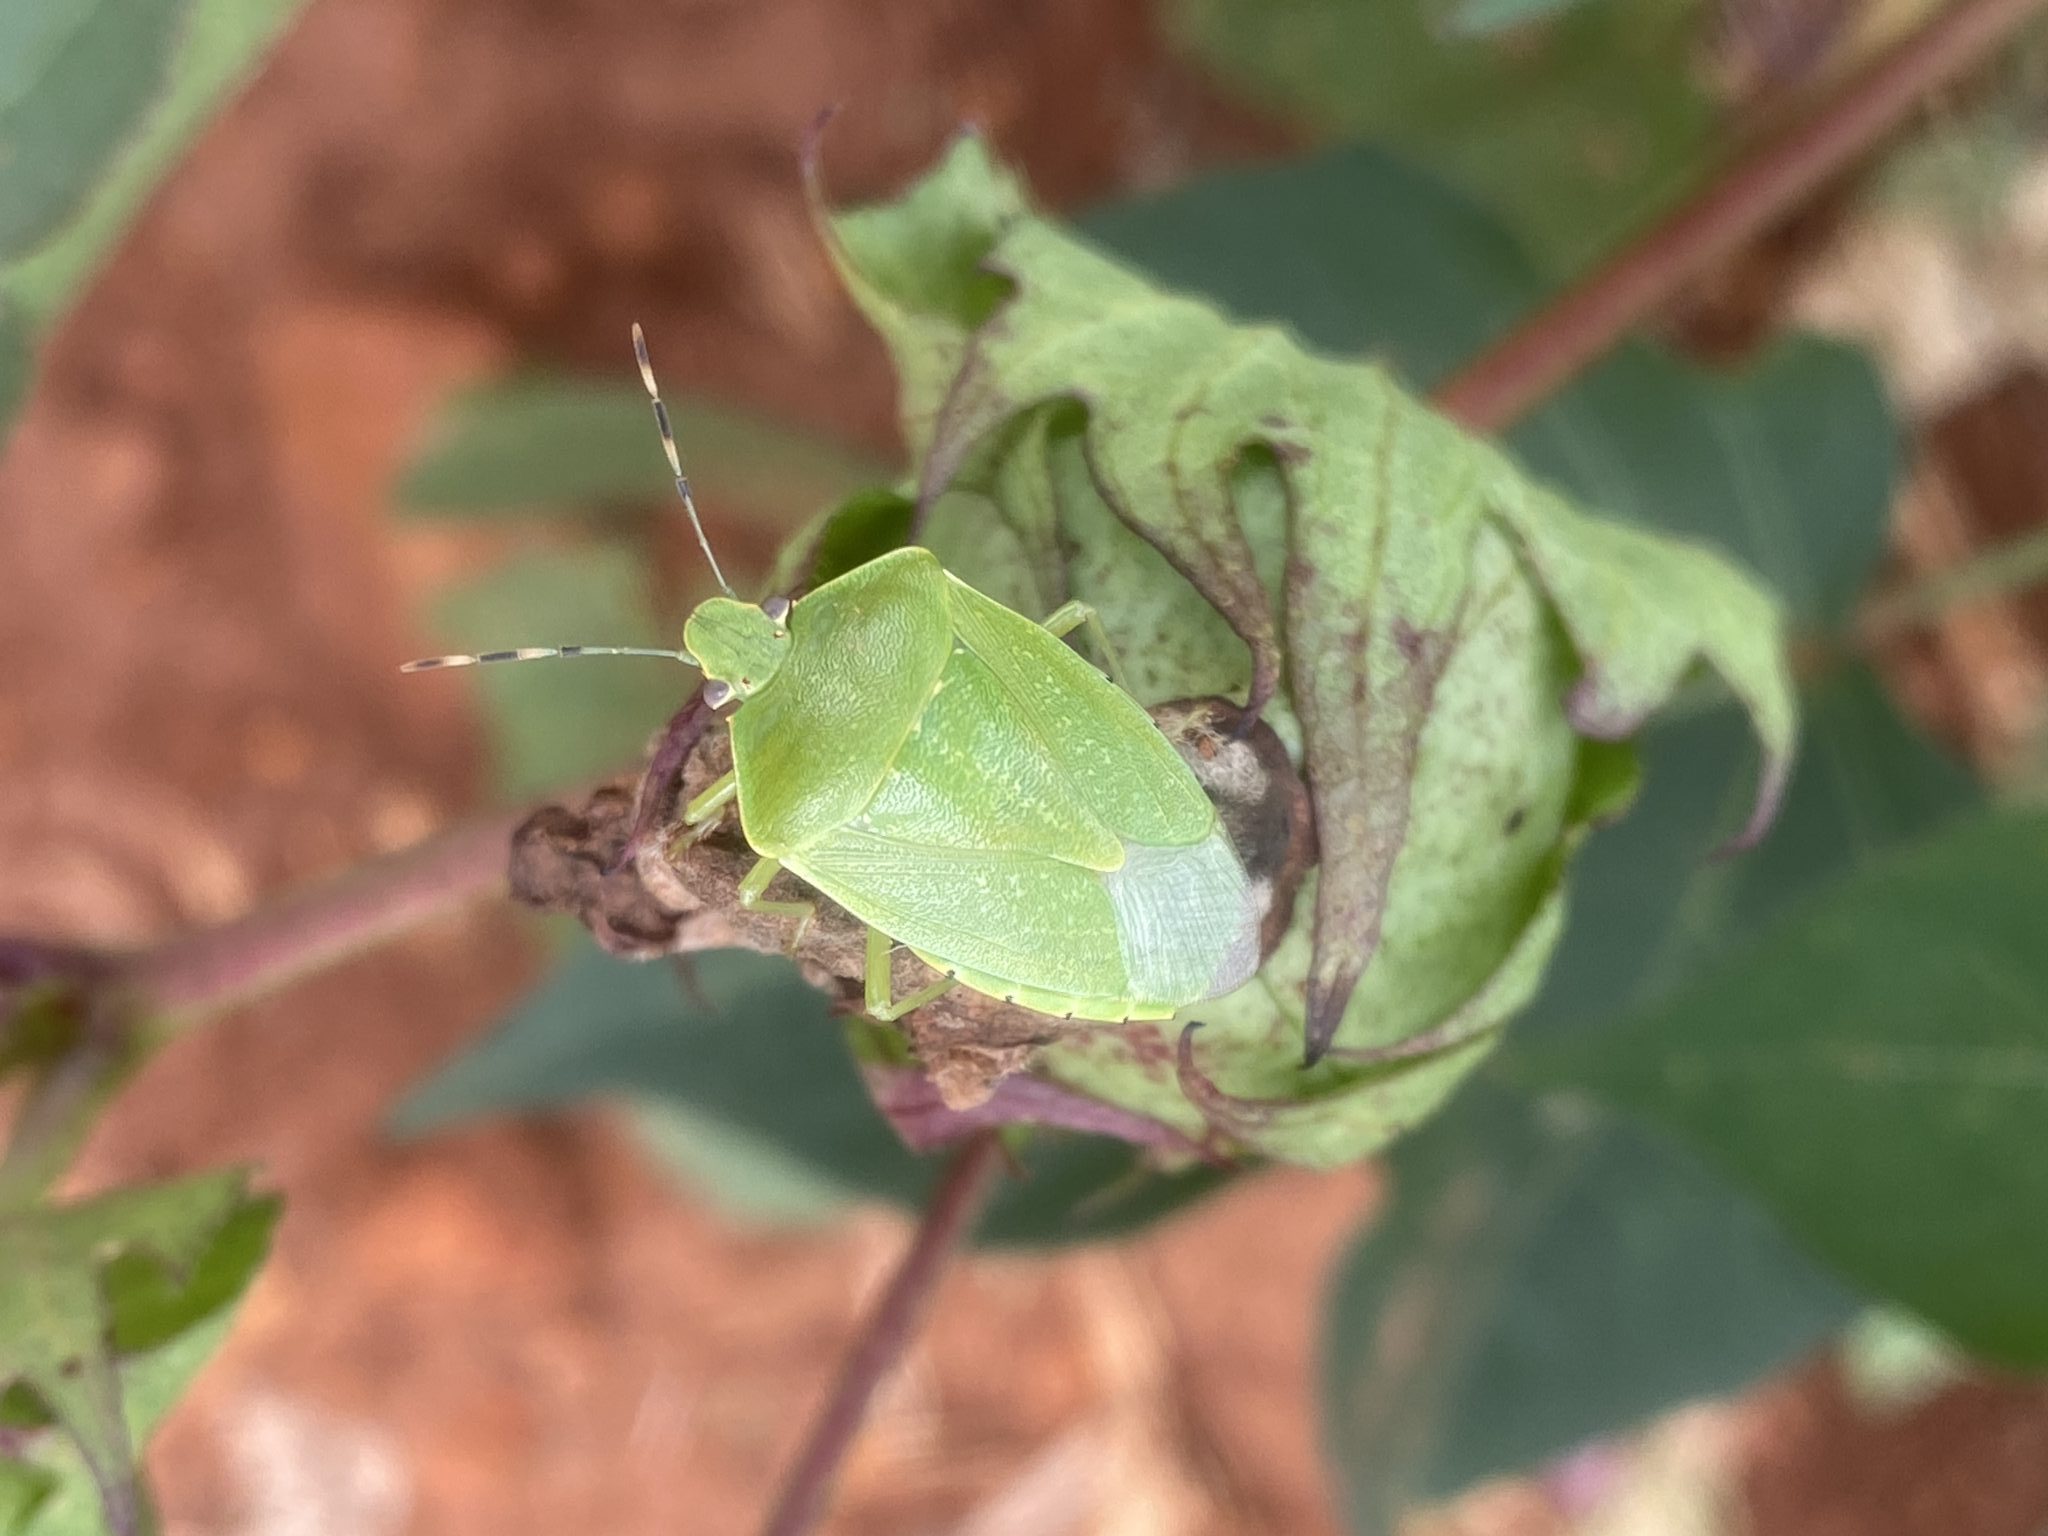 photo of an adult green stink bug on a cotton boll